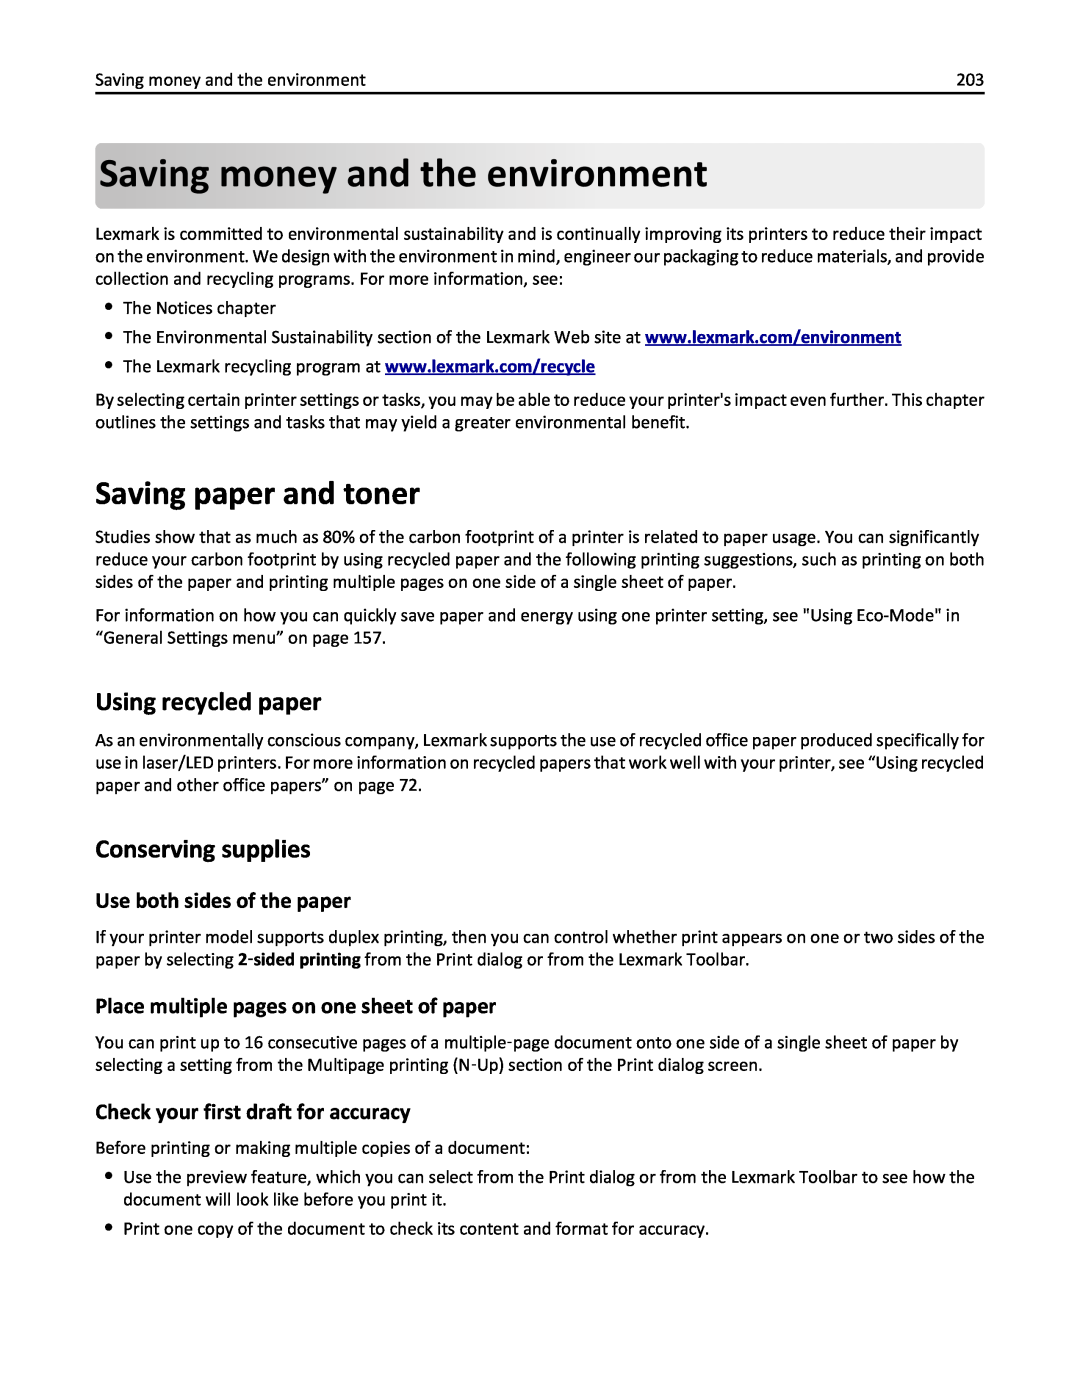 Lexmark 470, 35S5701 Saving money andthe environment, Saving paper and toner, Using recycled paper, Conserving supplies 